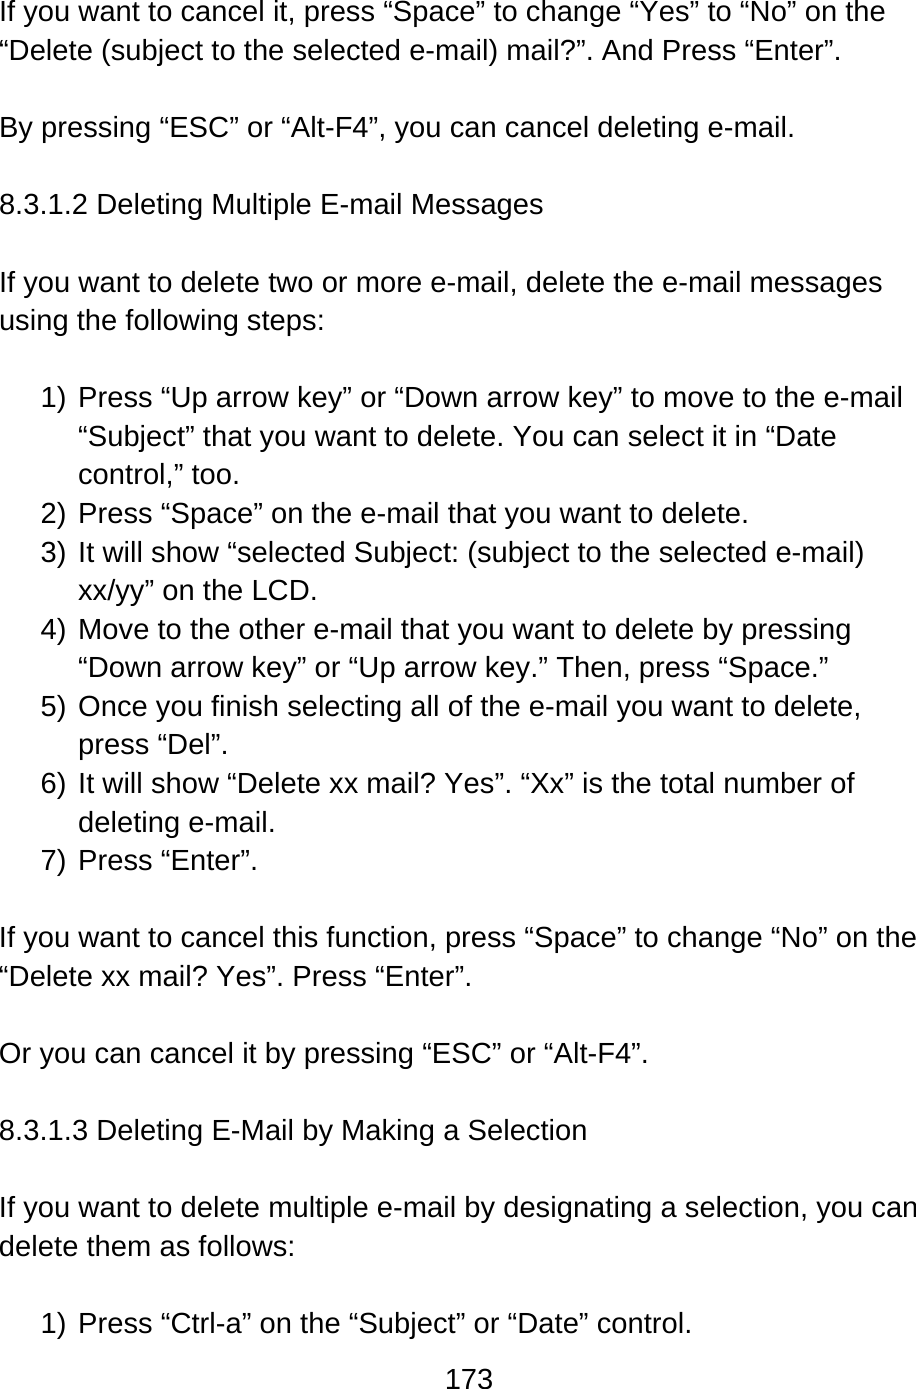 173   If you want to cancel it, press “Space” to change “Yes” to “No” on the “Delete (subject to the selected e-mail) mail?”. And Press “Enter”.  By pressing “ESC” or “Alt-F4”, you can cancel deleting e-mail.    8.3.1.2 Deleting Multiple E-mail Messages  If you want to delete two or more e-mail, delete the e-mail messages using the following steps:  1) Press “Up arrow key” or “Down arrow key” to move to the e-mail “Subject” that you want to delete. You can select it in “Date control,” too. 2) Press “Space” on the e-mail that you want to delete.     3) It will show “selected Subject: (subject to the selected e-mail) xx/yy” on the LCD. 4) Move to the other e-mail that you want to delete by pressing “Down arrow key” or “Up arrow key.” Then, press “Space.” 5) Once you finish selecting all of the e-mail you want to delete, press “Del”. 6) It will show “Delete xx mail? Yes”. “Xx” is the total number of deleting e-mail.   7) Press “Enter”.  If you want to cancel this function, press “Space” to change “No” on the “Delete xx mail? Yes”. Press “Enter”.    Or you can cancel it by pressing “ESC” or “Alt-F4”.  8.3.1.3 Deleting E-Mail by Making a Selection  If you want to delete multiple e-mail by designating a selection, you can delete them as follows:  1) Press “Ctrl-a” on the “Subject” or “Date” control.   